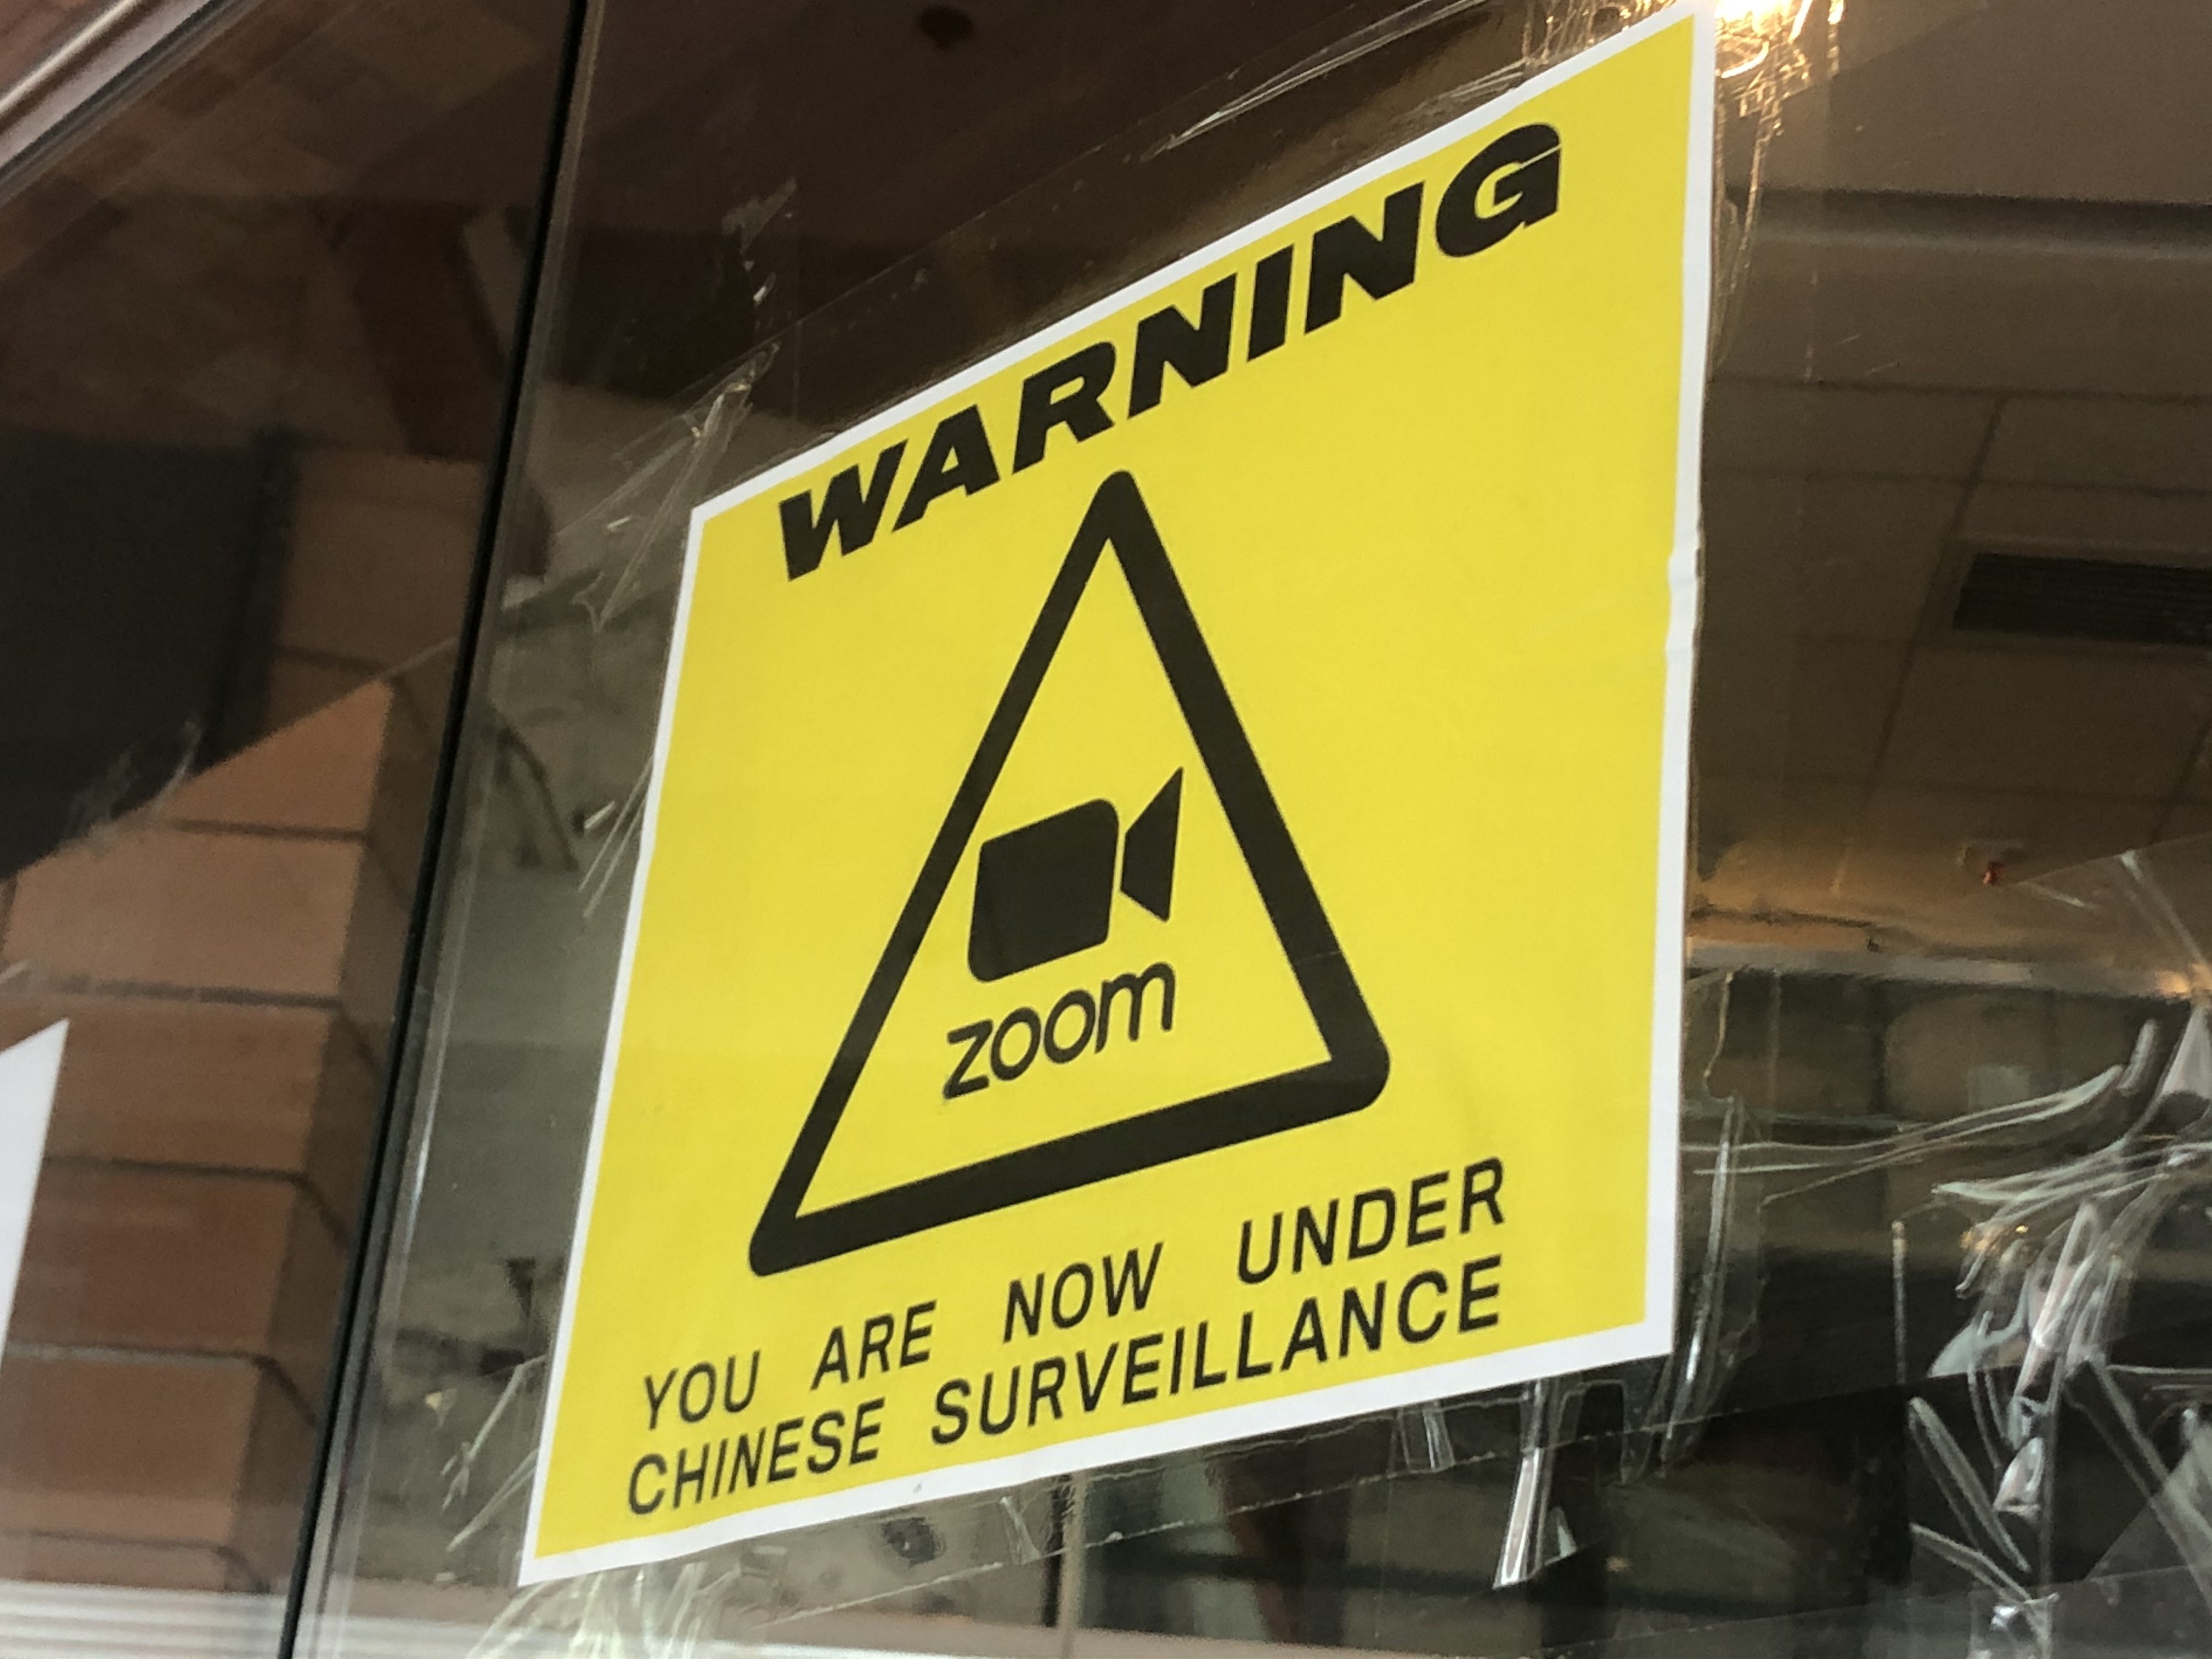 Fig. 2. Personal photograph of an anti-Zoom poster, equating Zoom with “surveillance,” appended to a campus window. This photograph depicts a square yellow sign on a window. The sign contains the word “WARNING” at the top in black text. Beneath is a black triangle with the Zoom logo (a video camera and the word “zoom” in lowercase font) inside. Under the triangle is the phrase “YOU ARE NOW UNDER CHINESE SURVEILLANCE.”